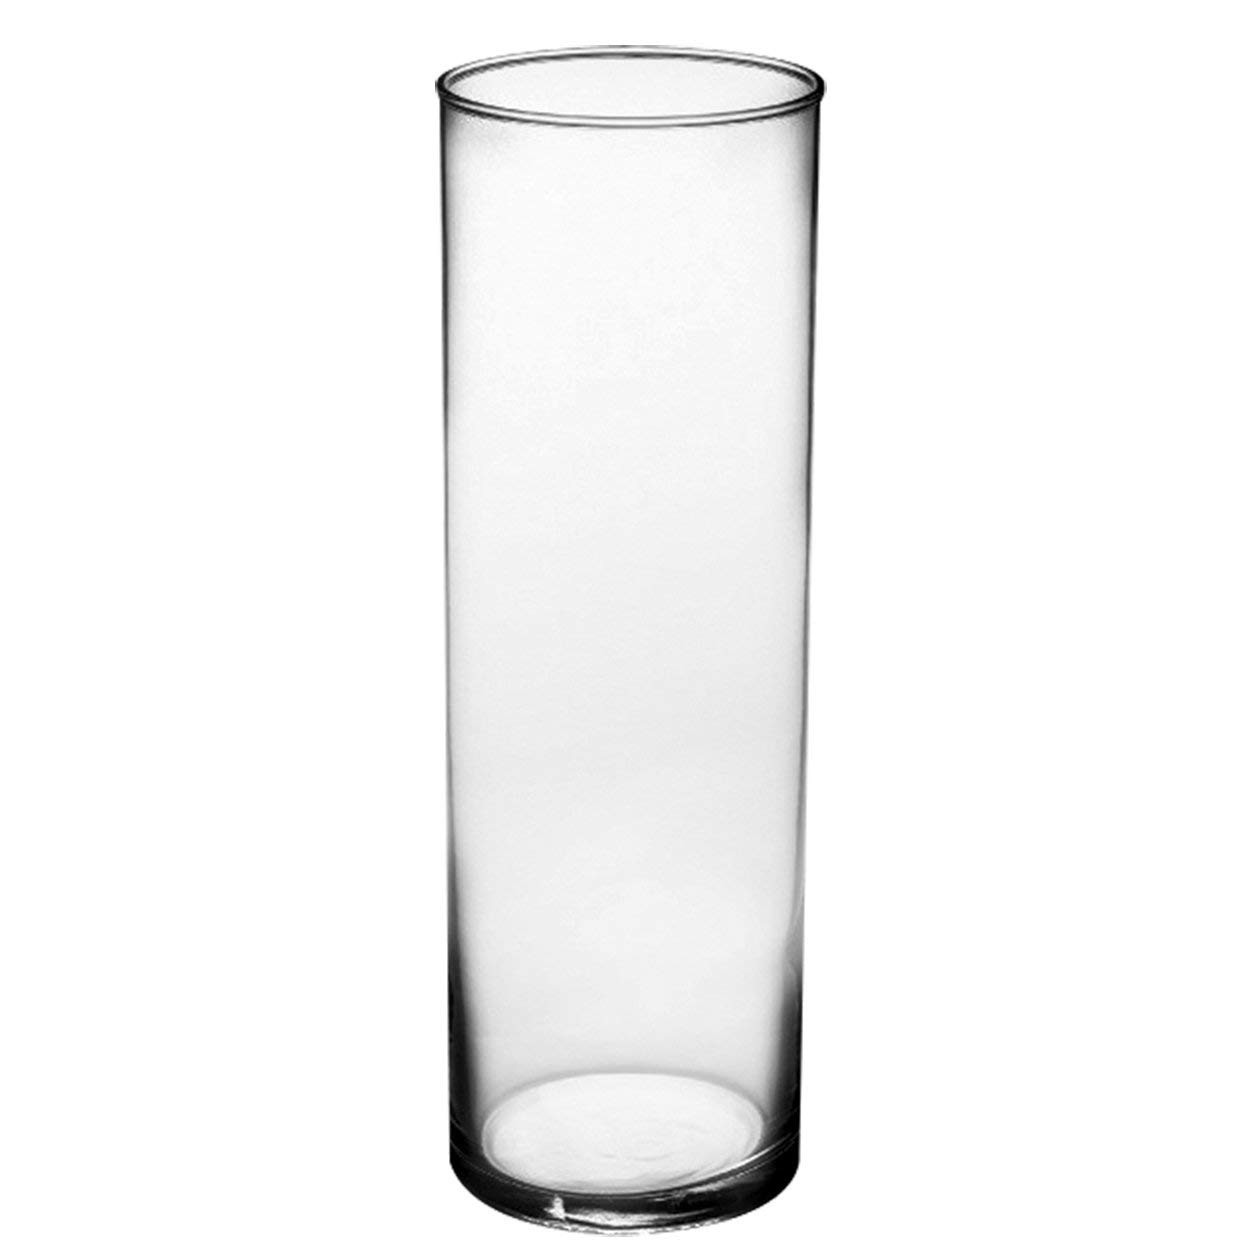 23 Best Tall Black Glass Vase 2022 free download tall black glass vase of amazon com syndicate sales 3 1 2 x 10 1 2 cylinder vase clear for amazon com syndicate sales 3 1 2 x 10 1 2 cylinder vase clear planters garden outdoor